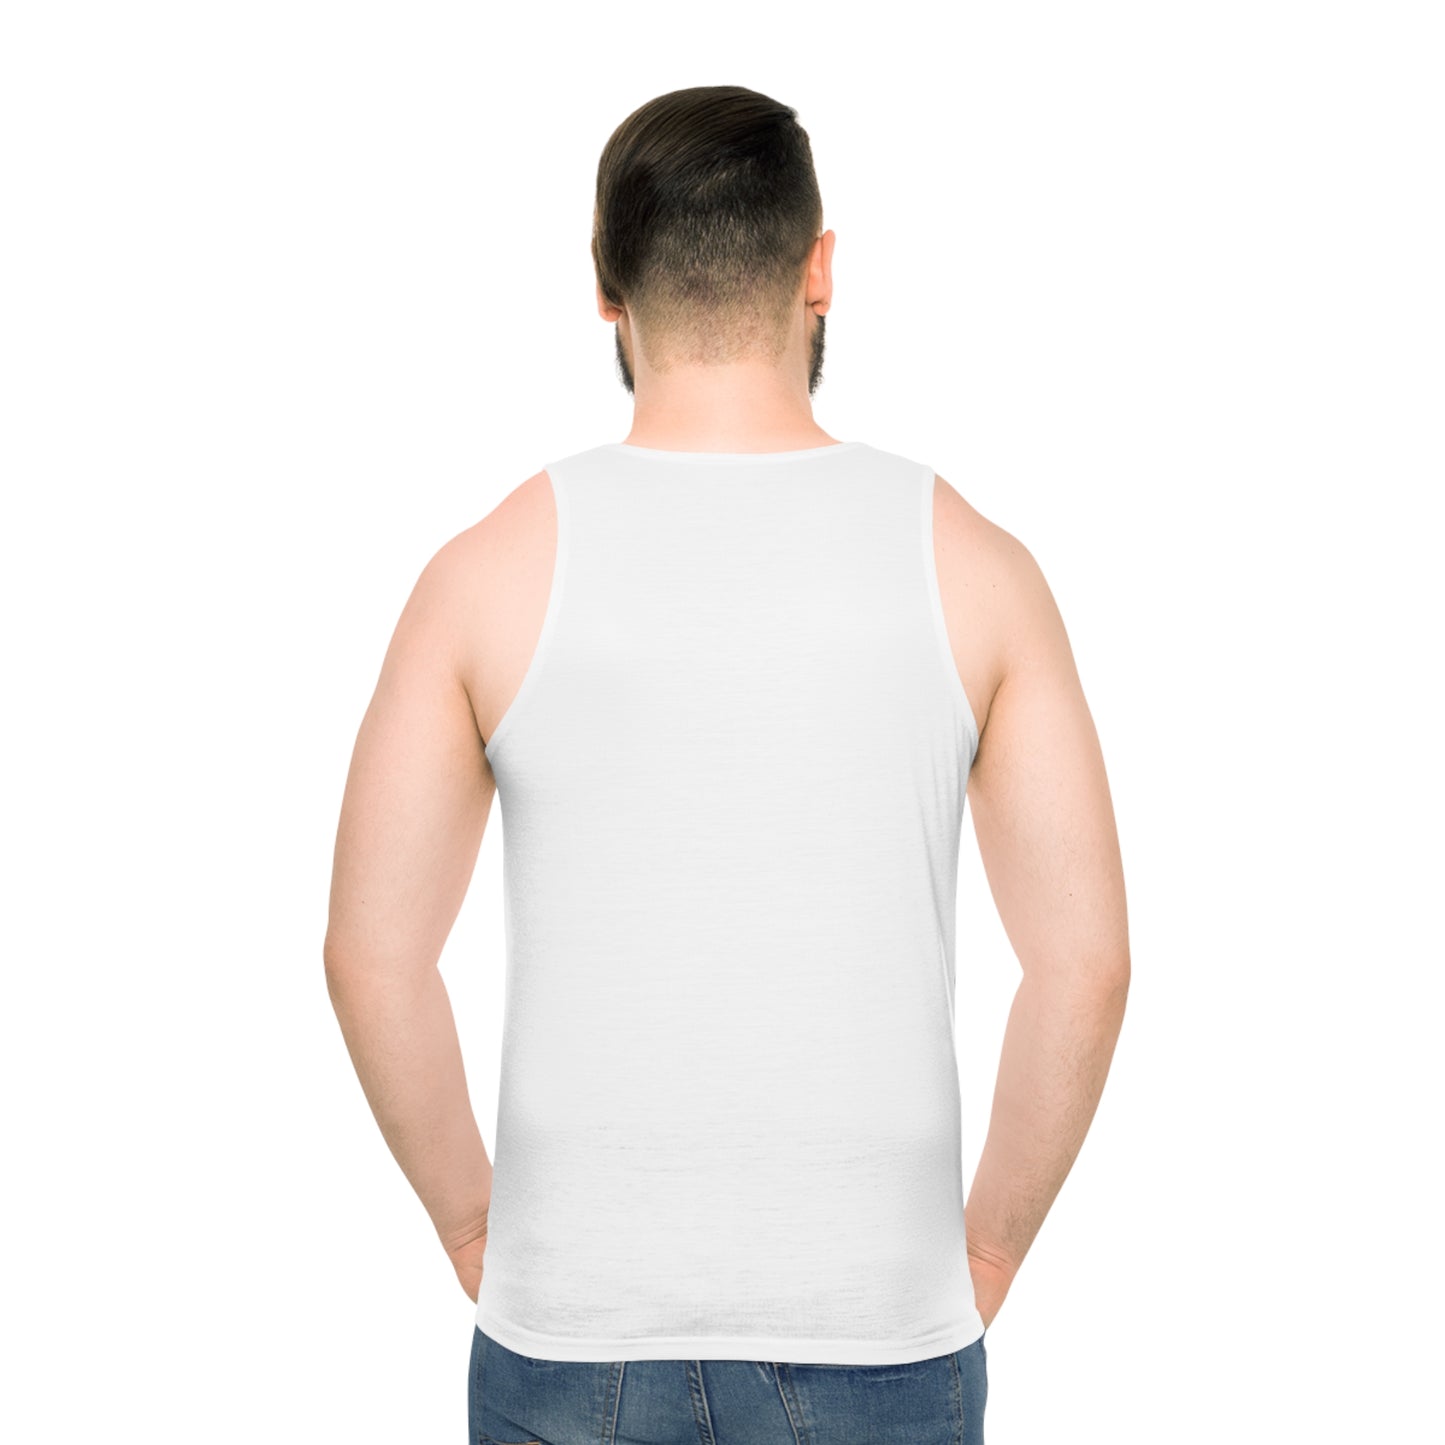 Y'all Means All - Unisex Tank Top